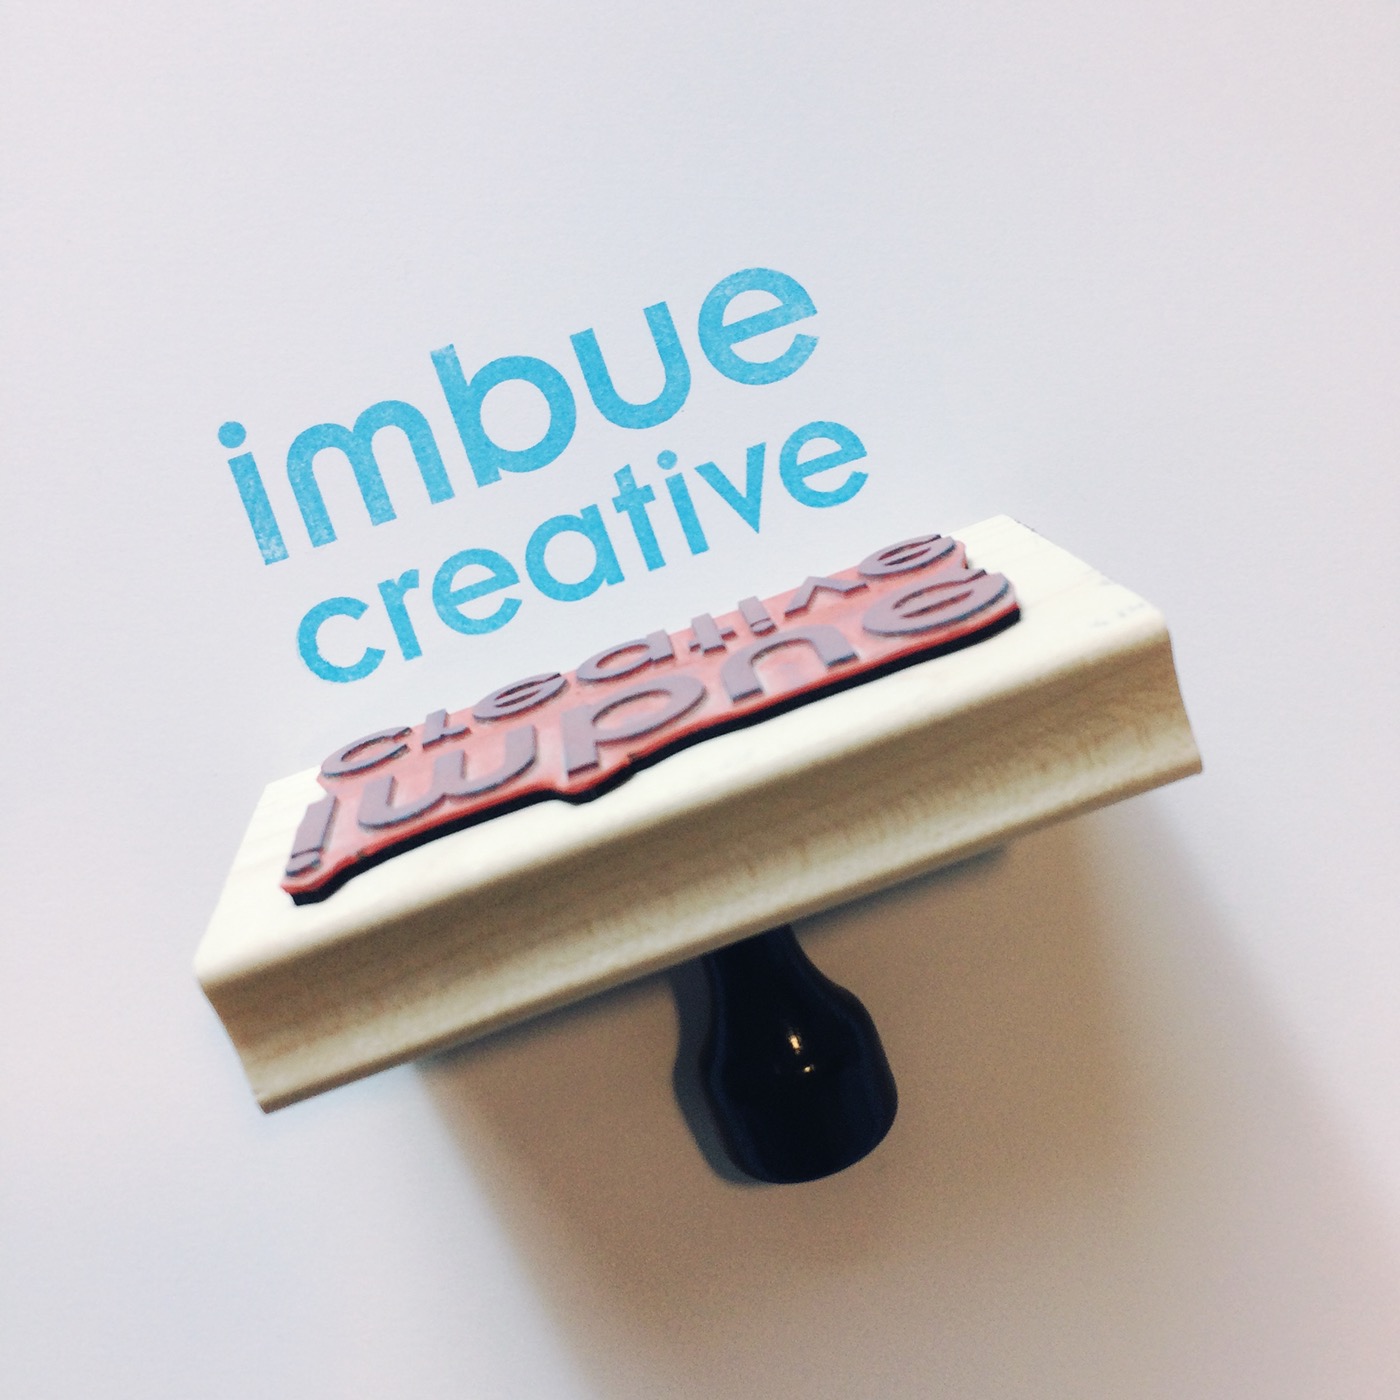 stamp rubber Rubber Stamp Imbue creative agency Advertising  mark logo